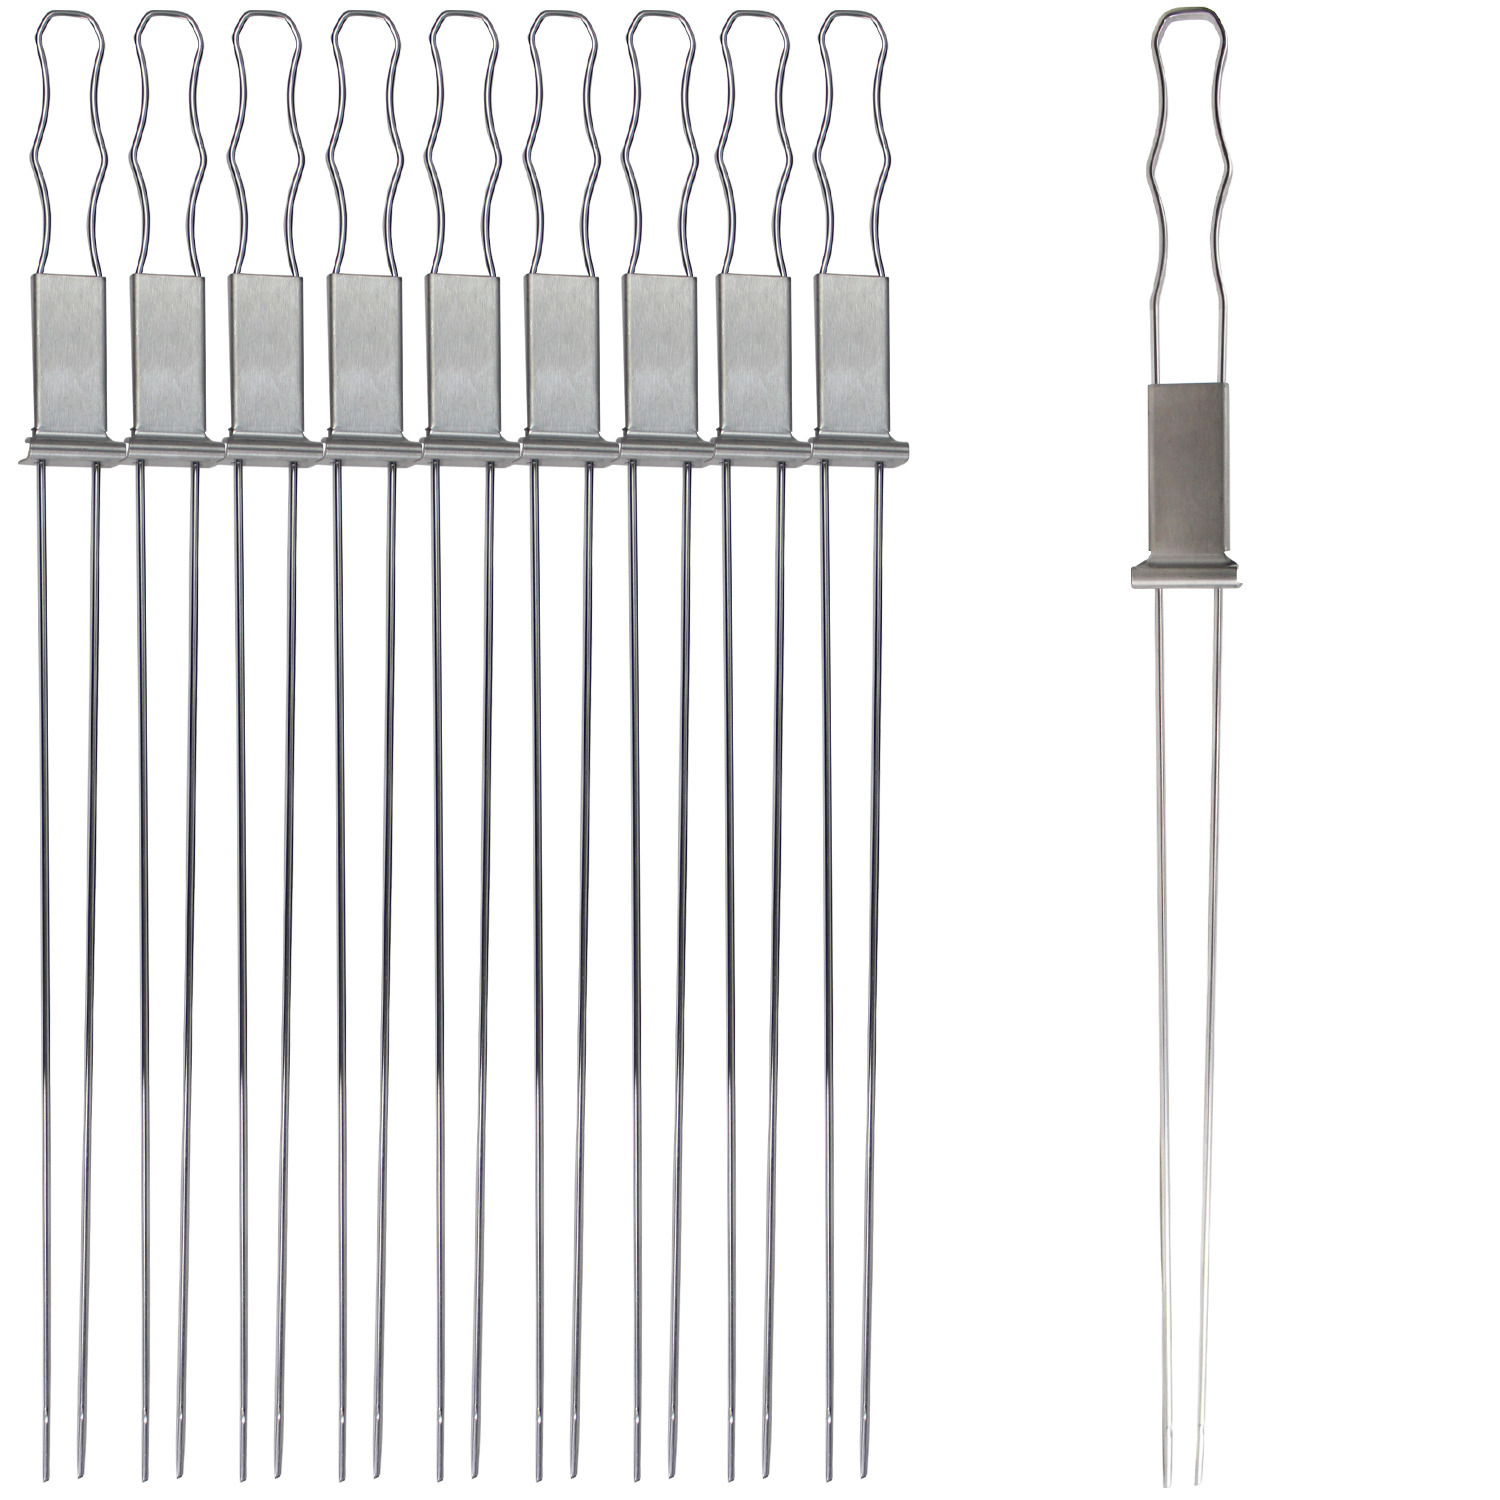 17 inch BBQ Slide Skewers Set of 10, Used for Barbecuing Meat, Poultry, Seafood, Vegetables, Cheese, Fruit, Stainless Steel, Barbeque Accessories